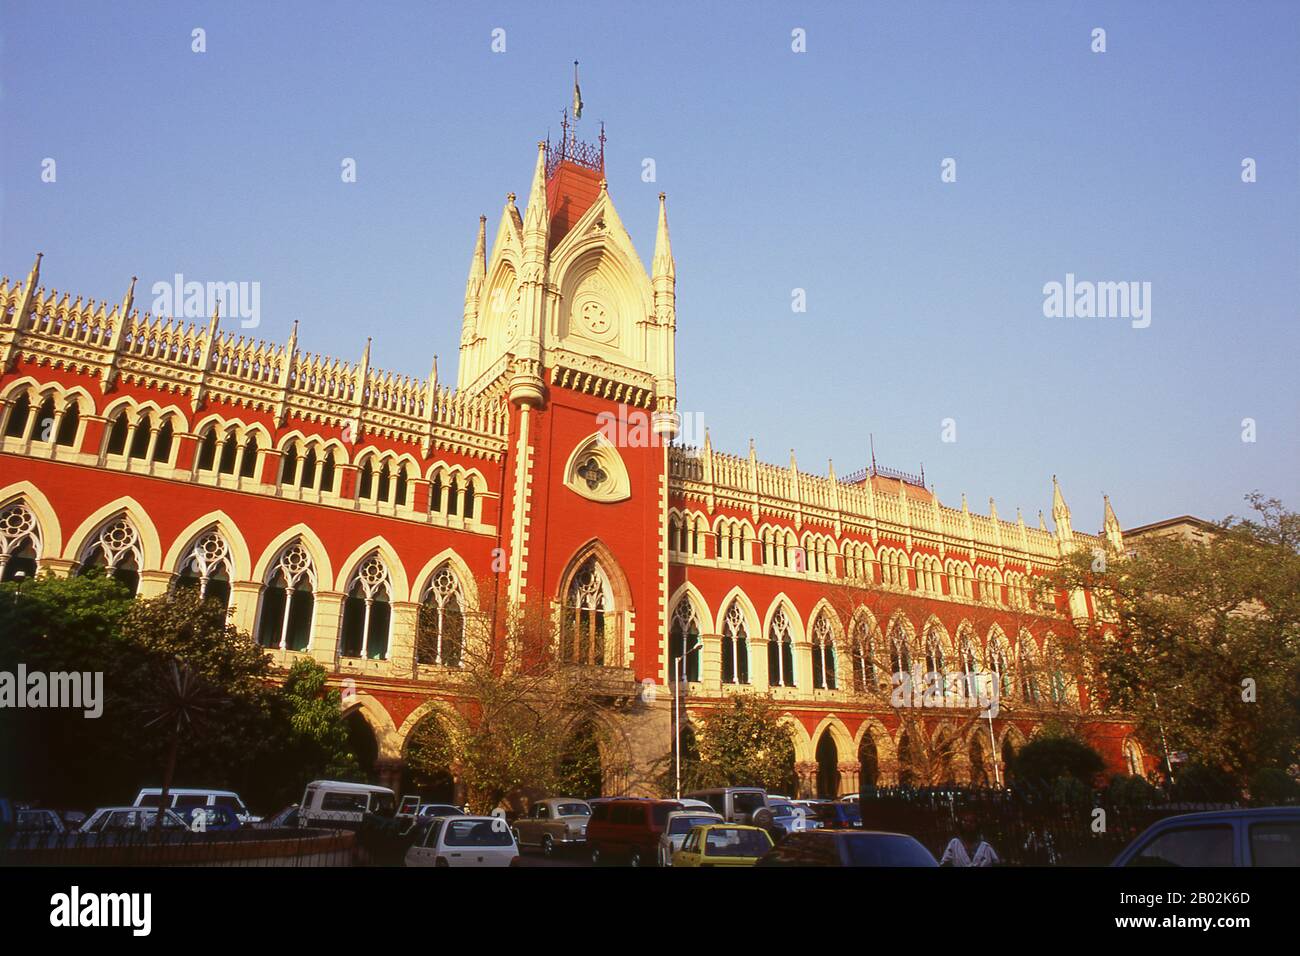 The Calcutta High Court (it retains the old name as it is an institution) was built in a neo-Gothic style in 1872, by the architect Walter Granville.  The tax records of Mughal Emperor Akbar (1584–1598) as well as the work of a 15th century Bengali poet, Bipradaas, both mention a settlement named Kalikata (thought to mean ‘Steps of Kali’ for the Hindu goddess Kali) from which the name Calcutta is believed to derive.  In 1690 Job Charnock, an agent of the East India Company, founded the first modern settlement in this location. In 1698 the company purchased the three villages of Sutanuti, Kolik Stock Photo